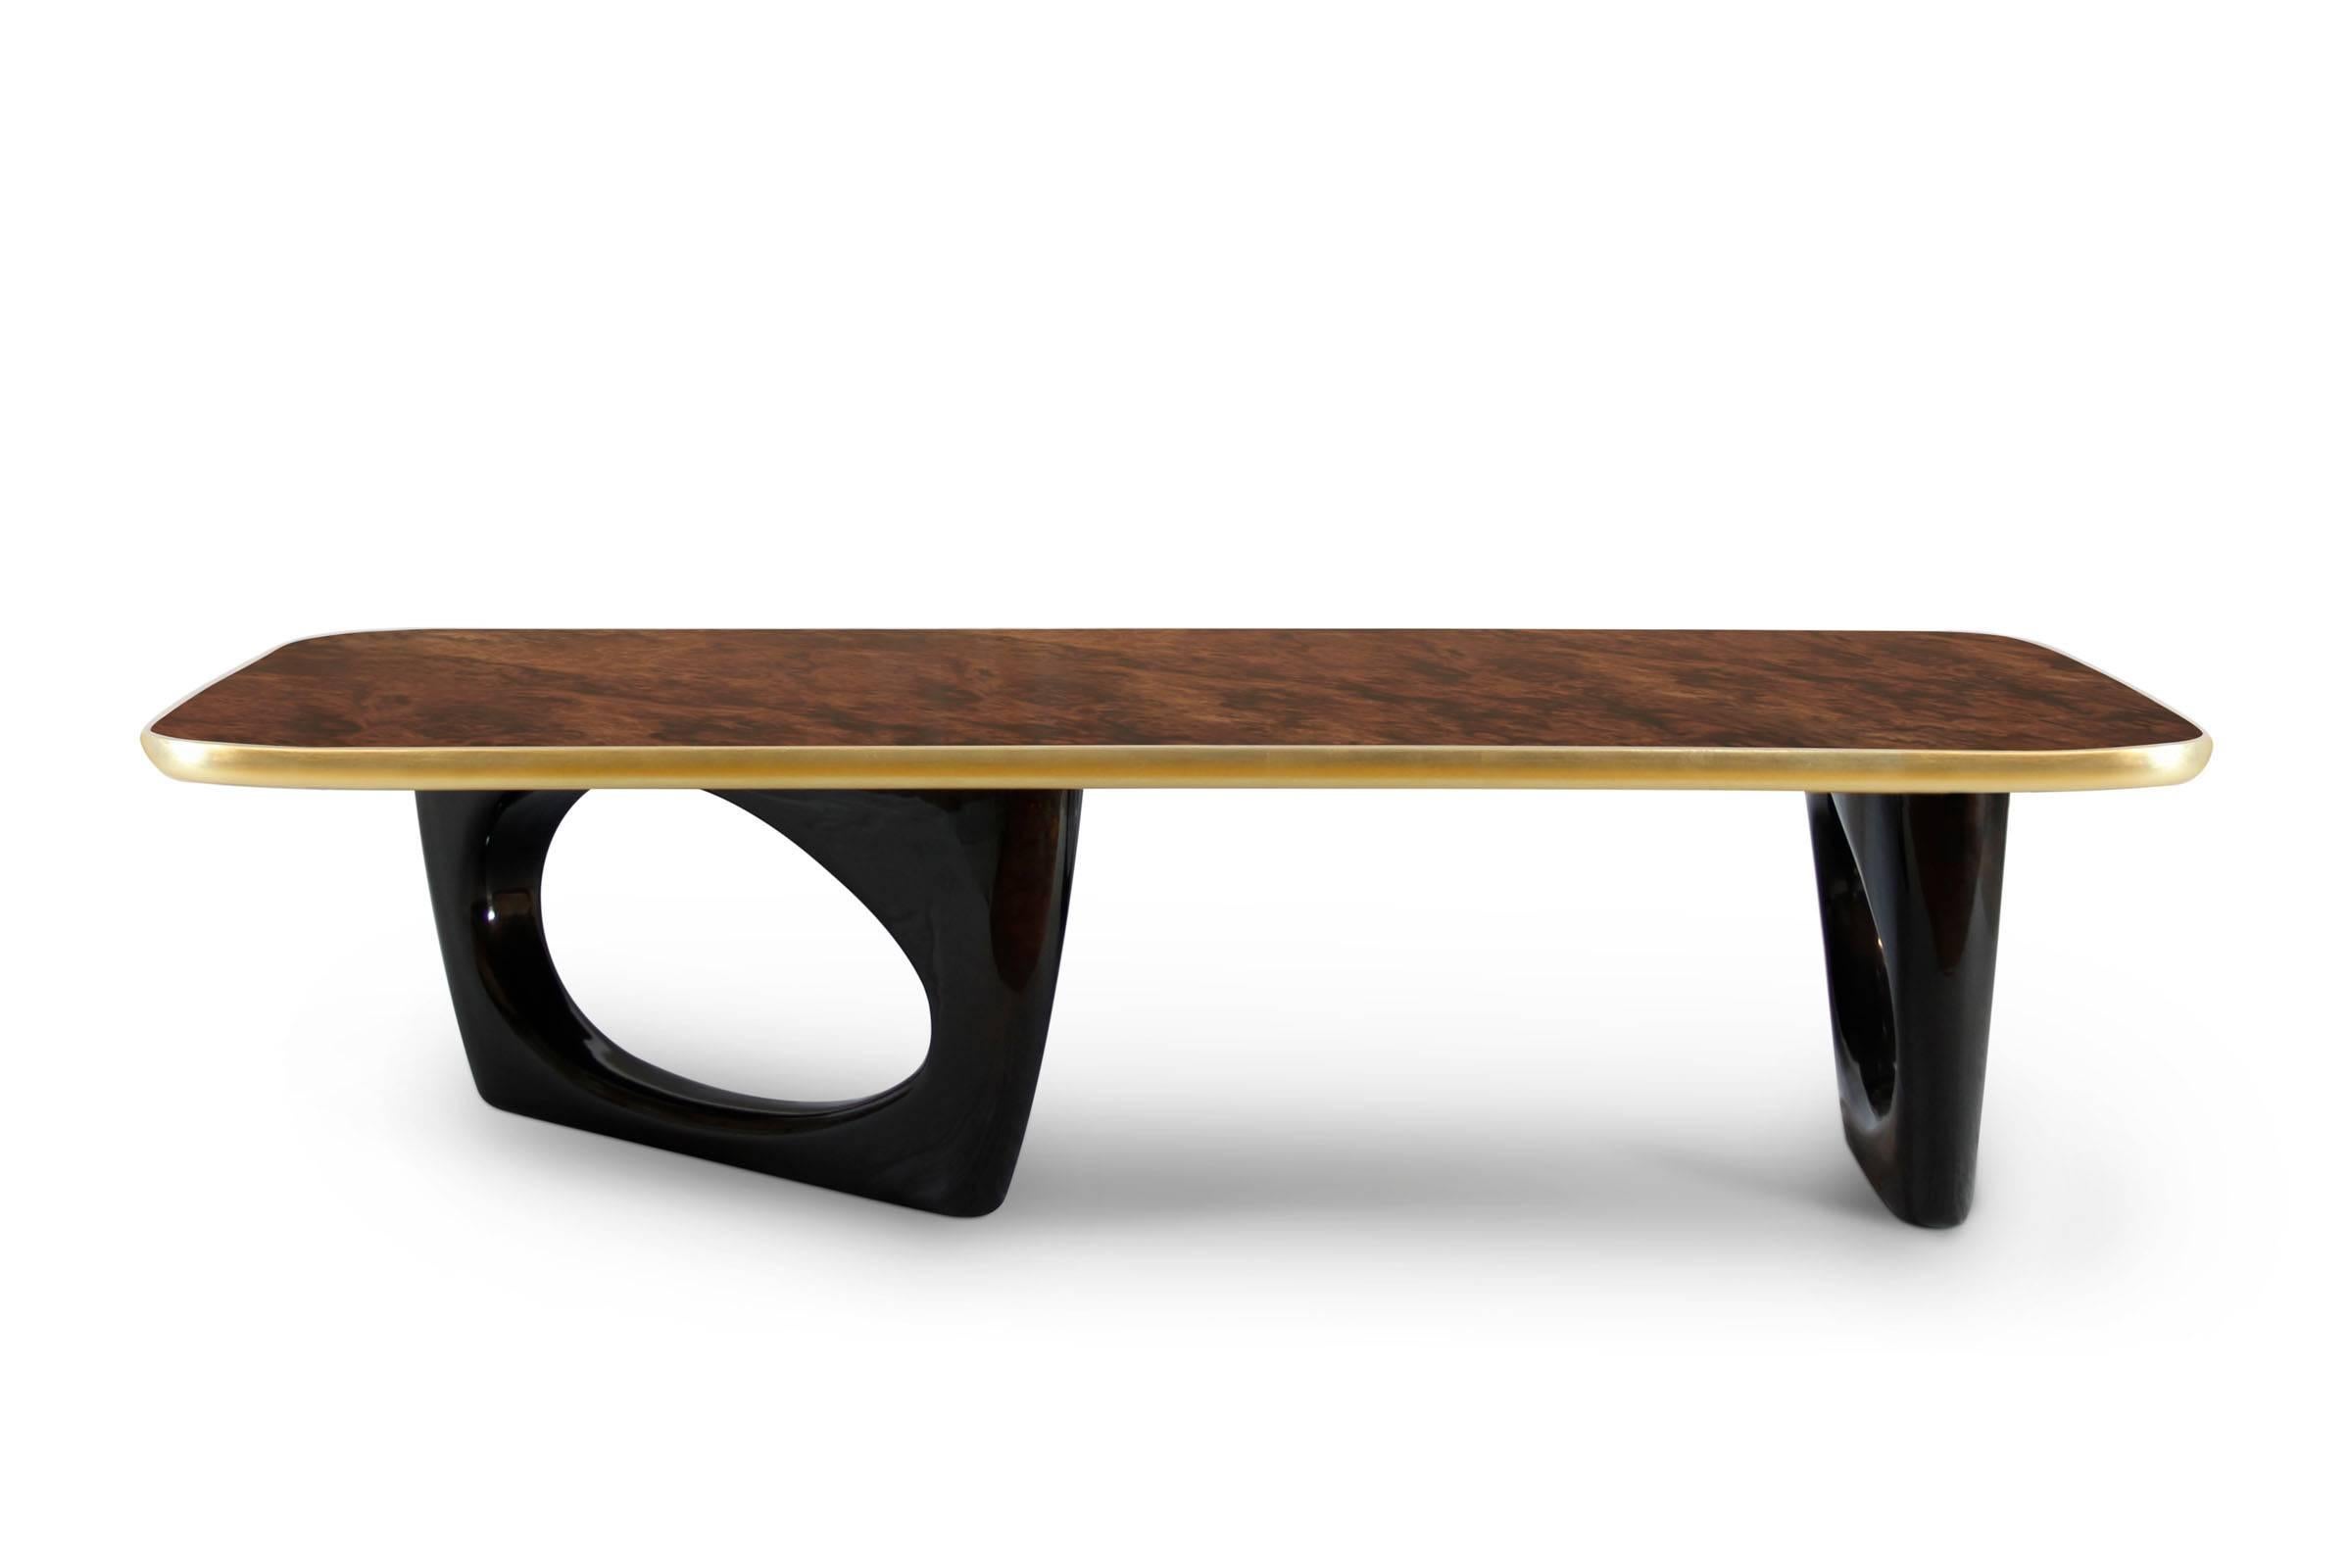 Coffee table gold walnut root with solid walnut top
with a gold leaf frame and black varnished walnut wood base.
